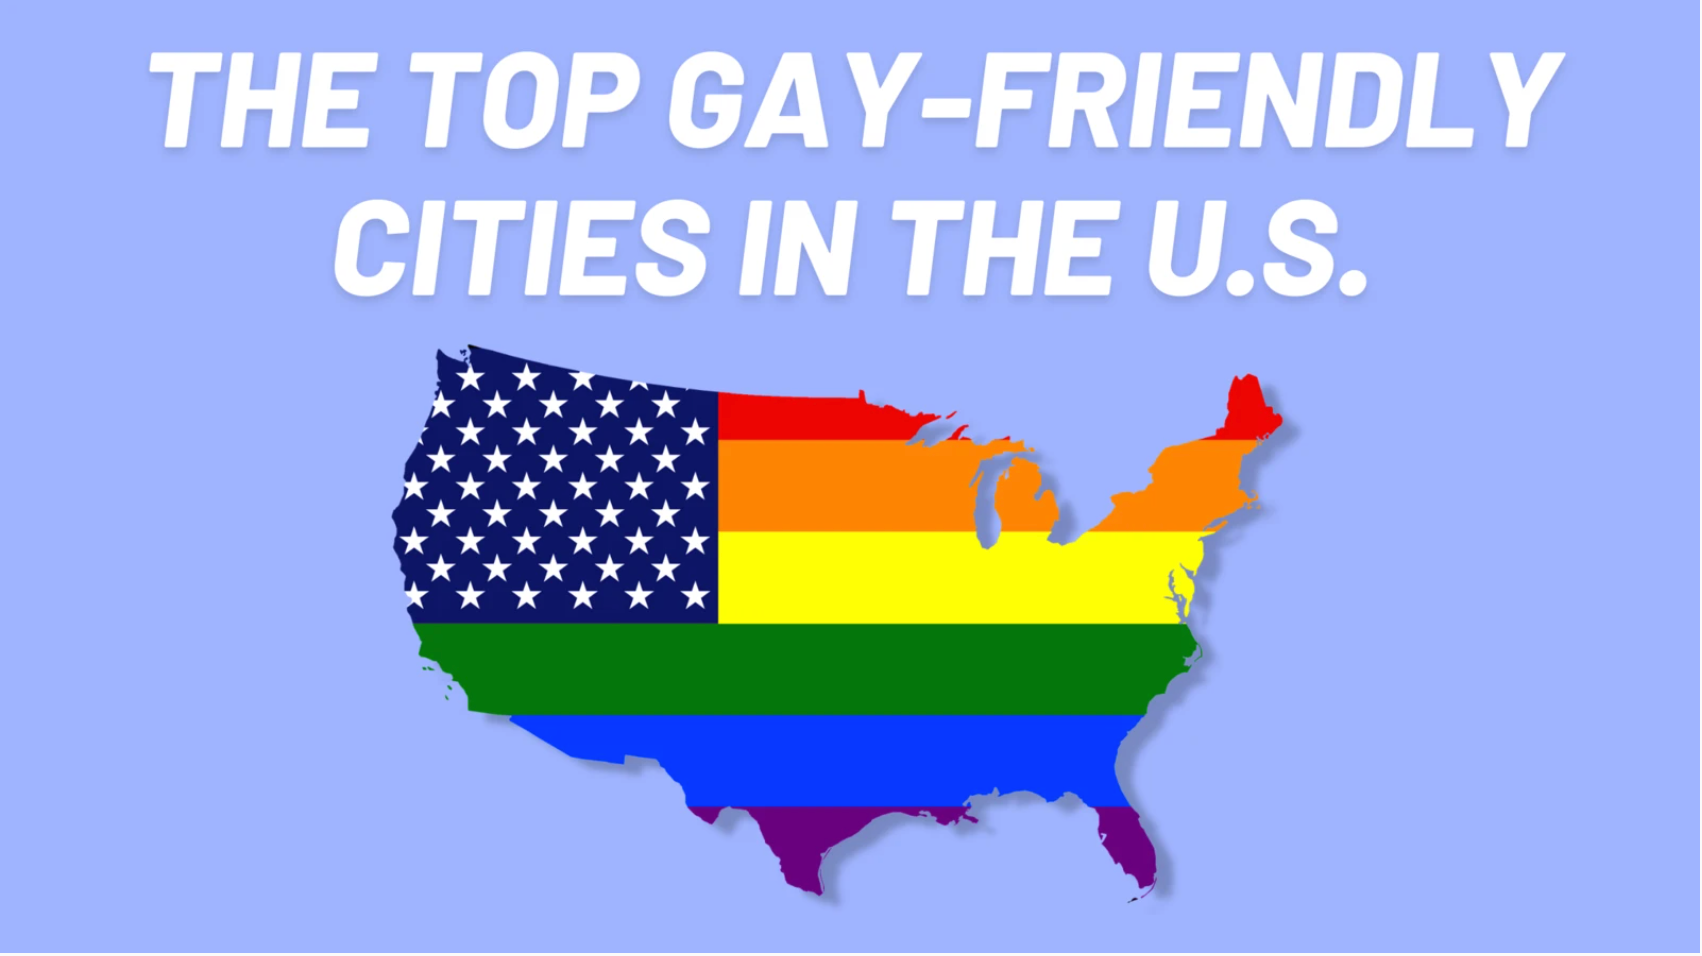 Top Gay-Friendly Cities in the U.S.